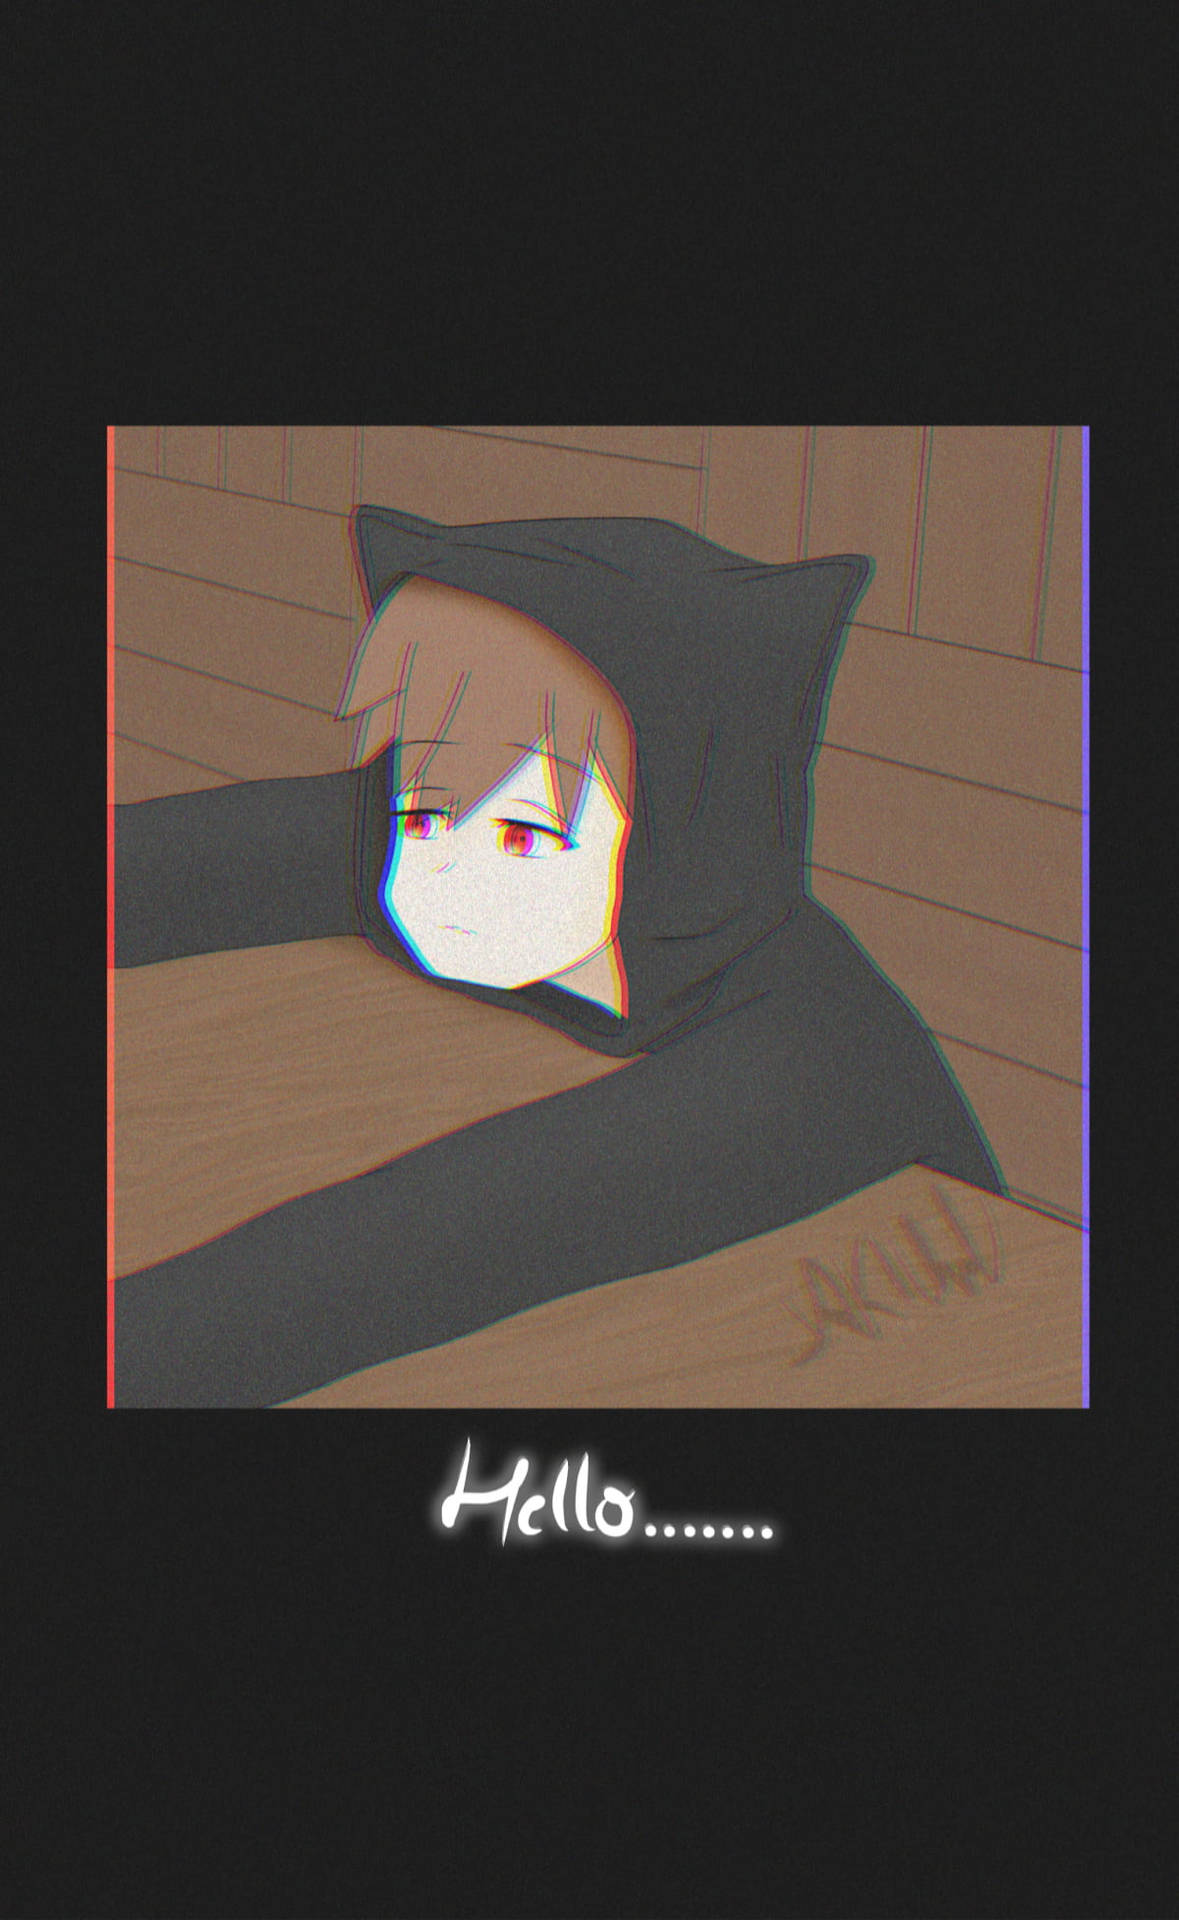 Gloomy Adolescent: The Cartoon Depiction of a Sad Boy with a Black Hoodie Wallpaper